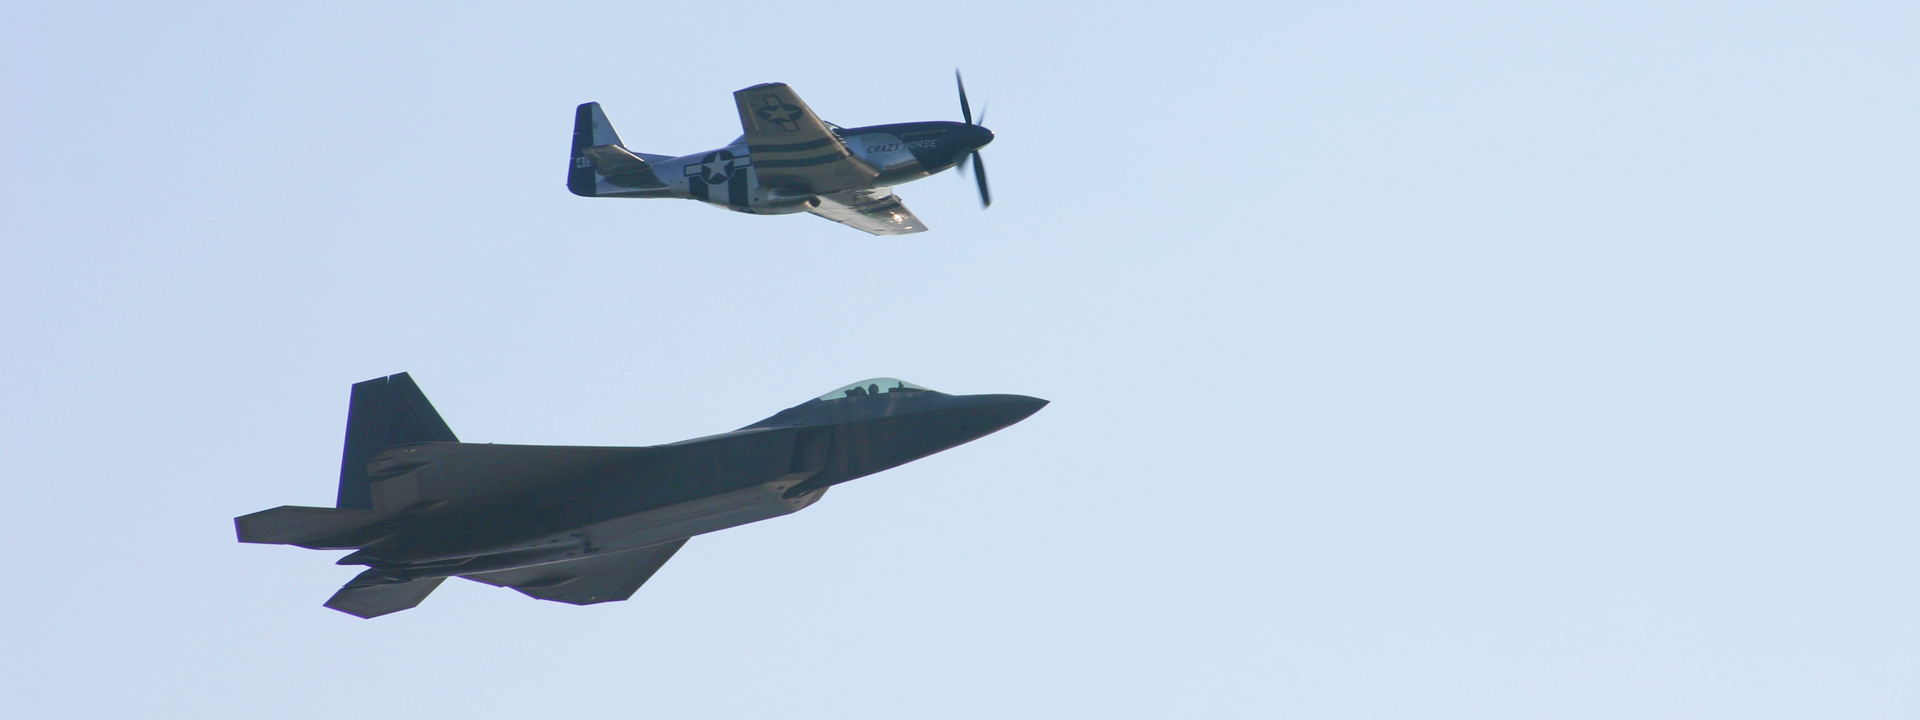 F-22 Raptor and P-51 Mustang